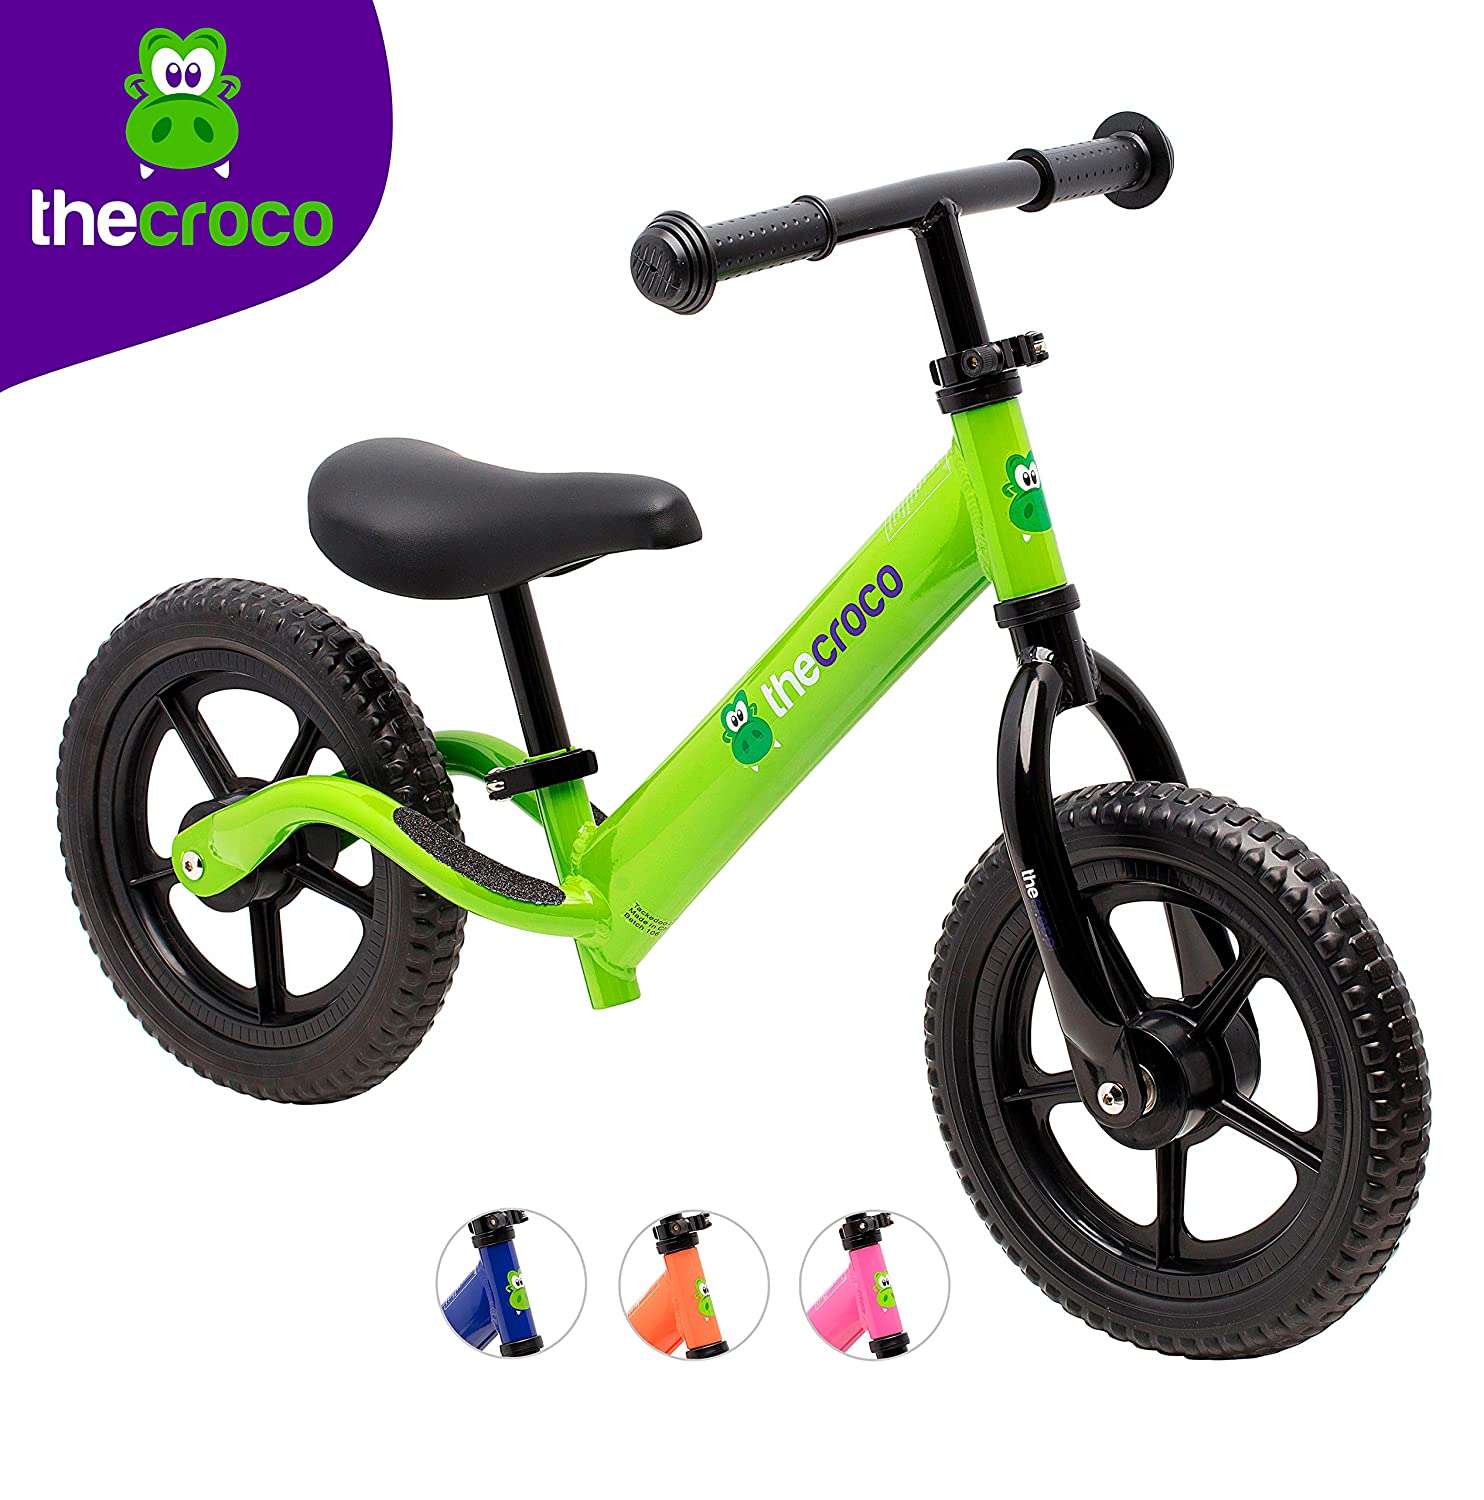 TheCroco Aluminum Lightweight Balance Bike for Toddlers and Kids